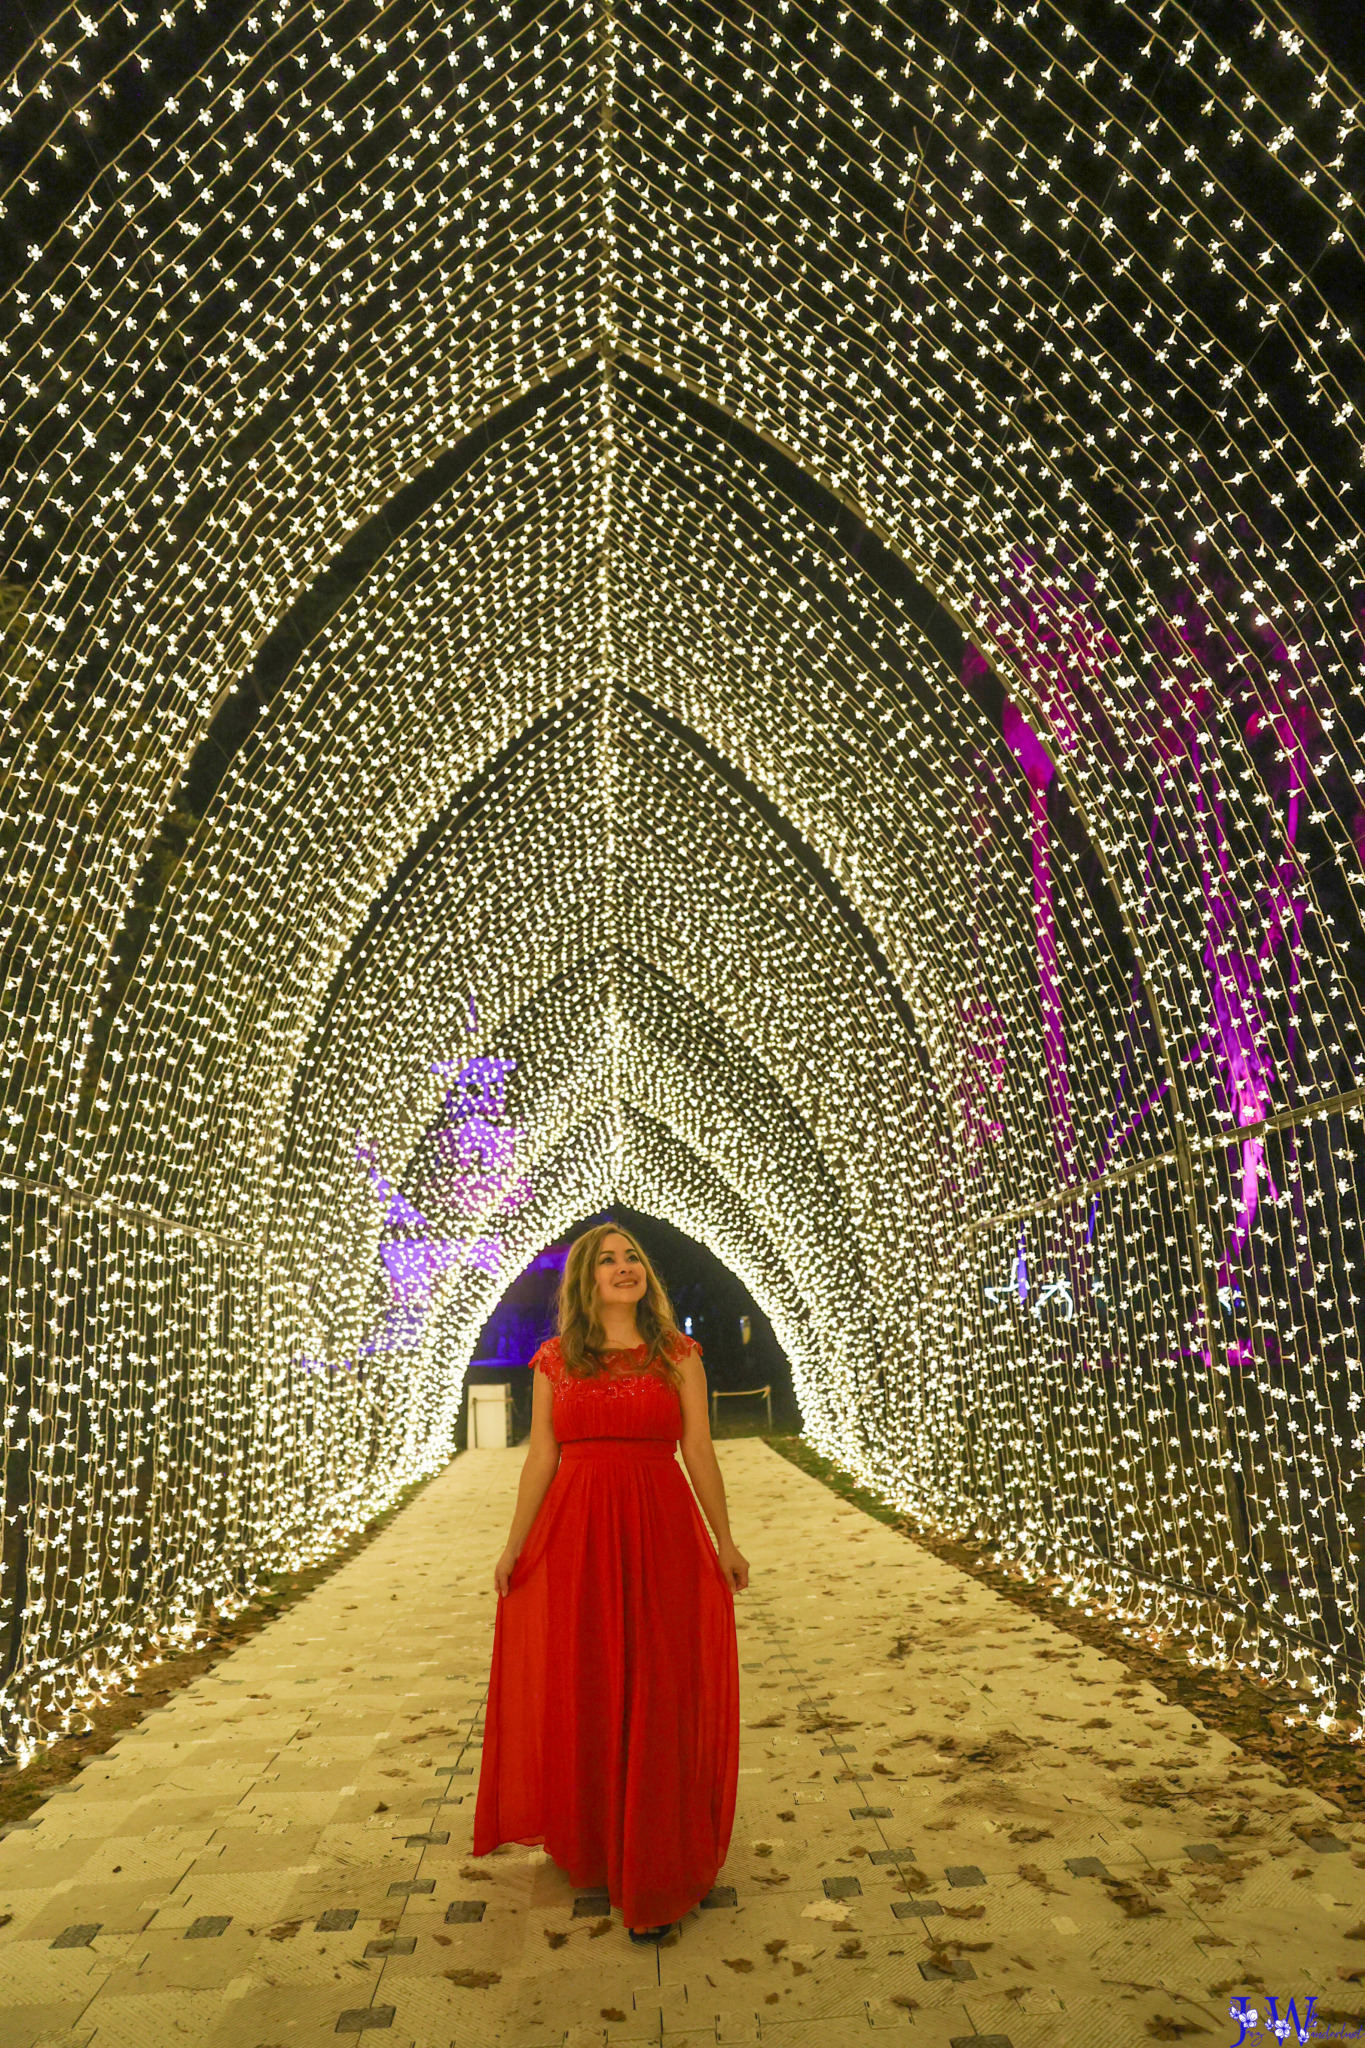 Lightscape christmas light experience in Southern California. Photography by Jaz Wanderlust.